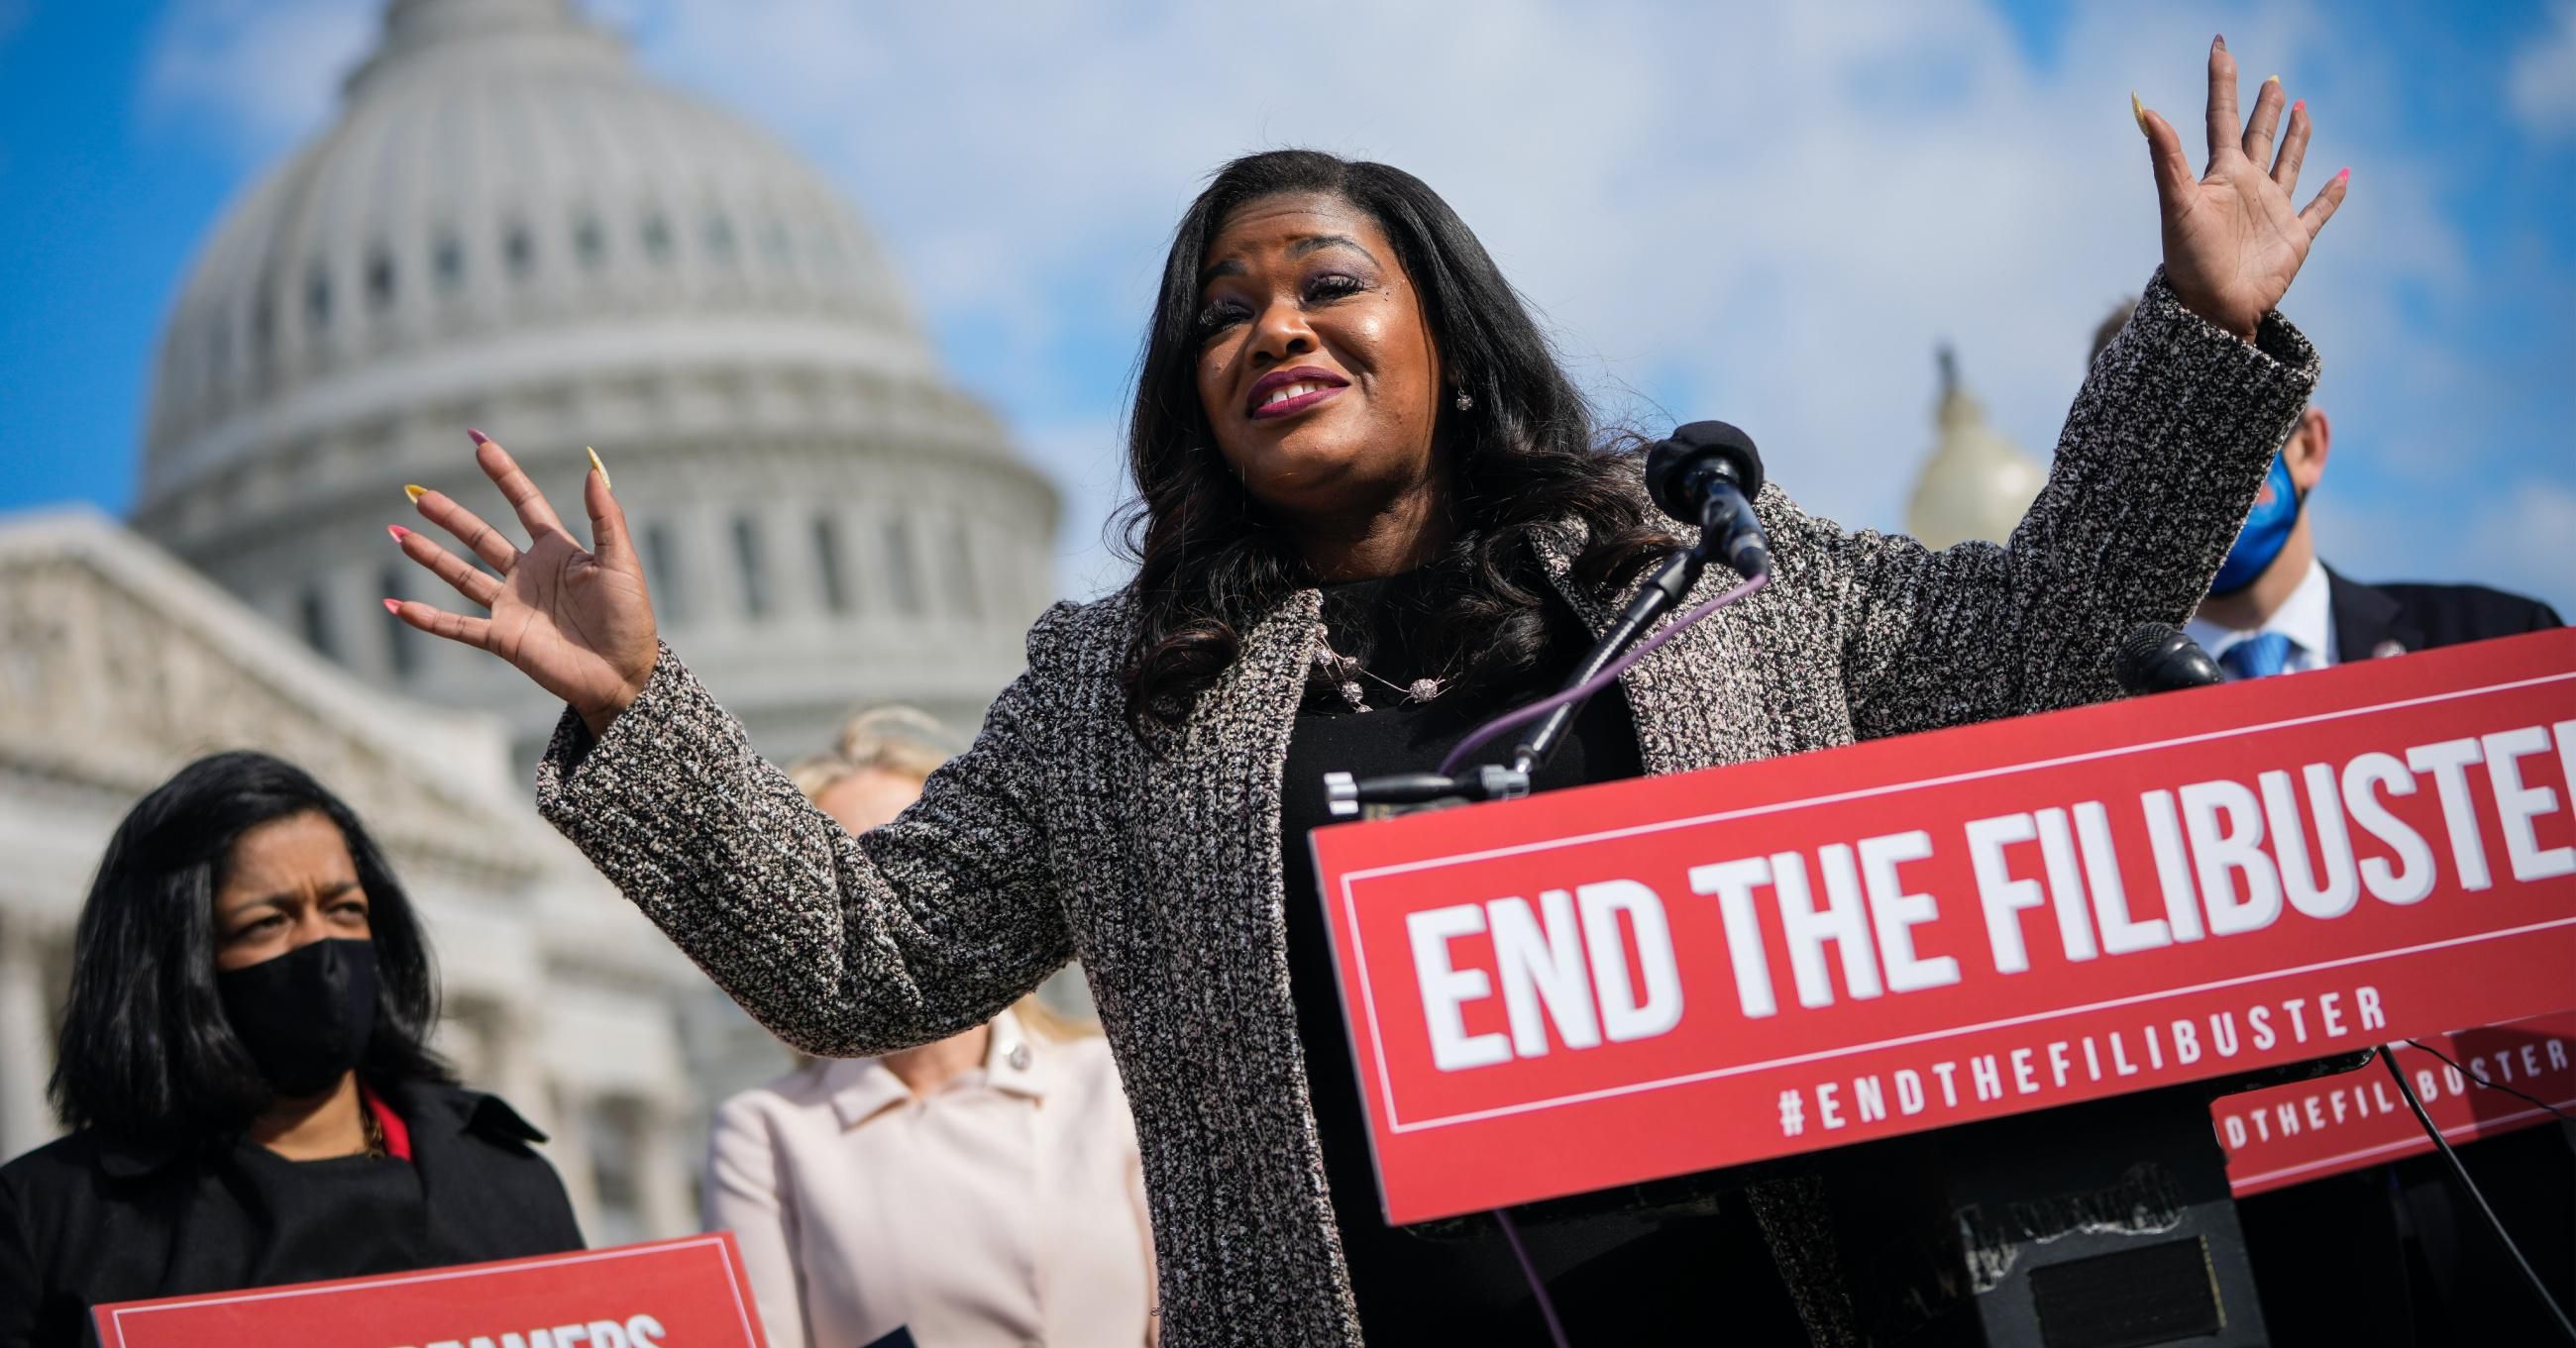 Rep. Cori Bush (D-Mo.) speaks in favor of abolishing the filibuster at an April 22, 2021 news conference outside the U.S. Capitol in Washington, D.C. (Photo: Drew Angerer/Getty Images) 